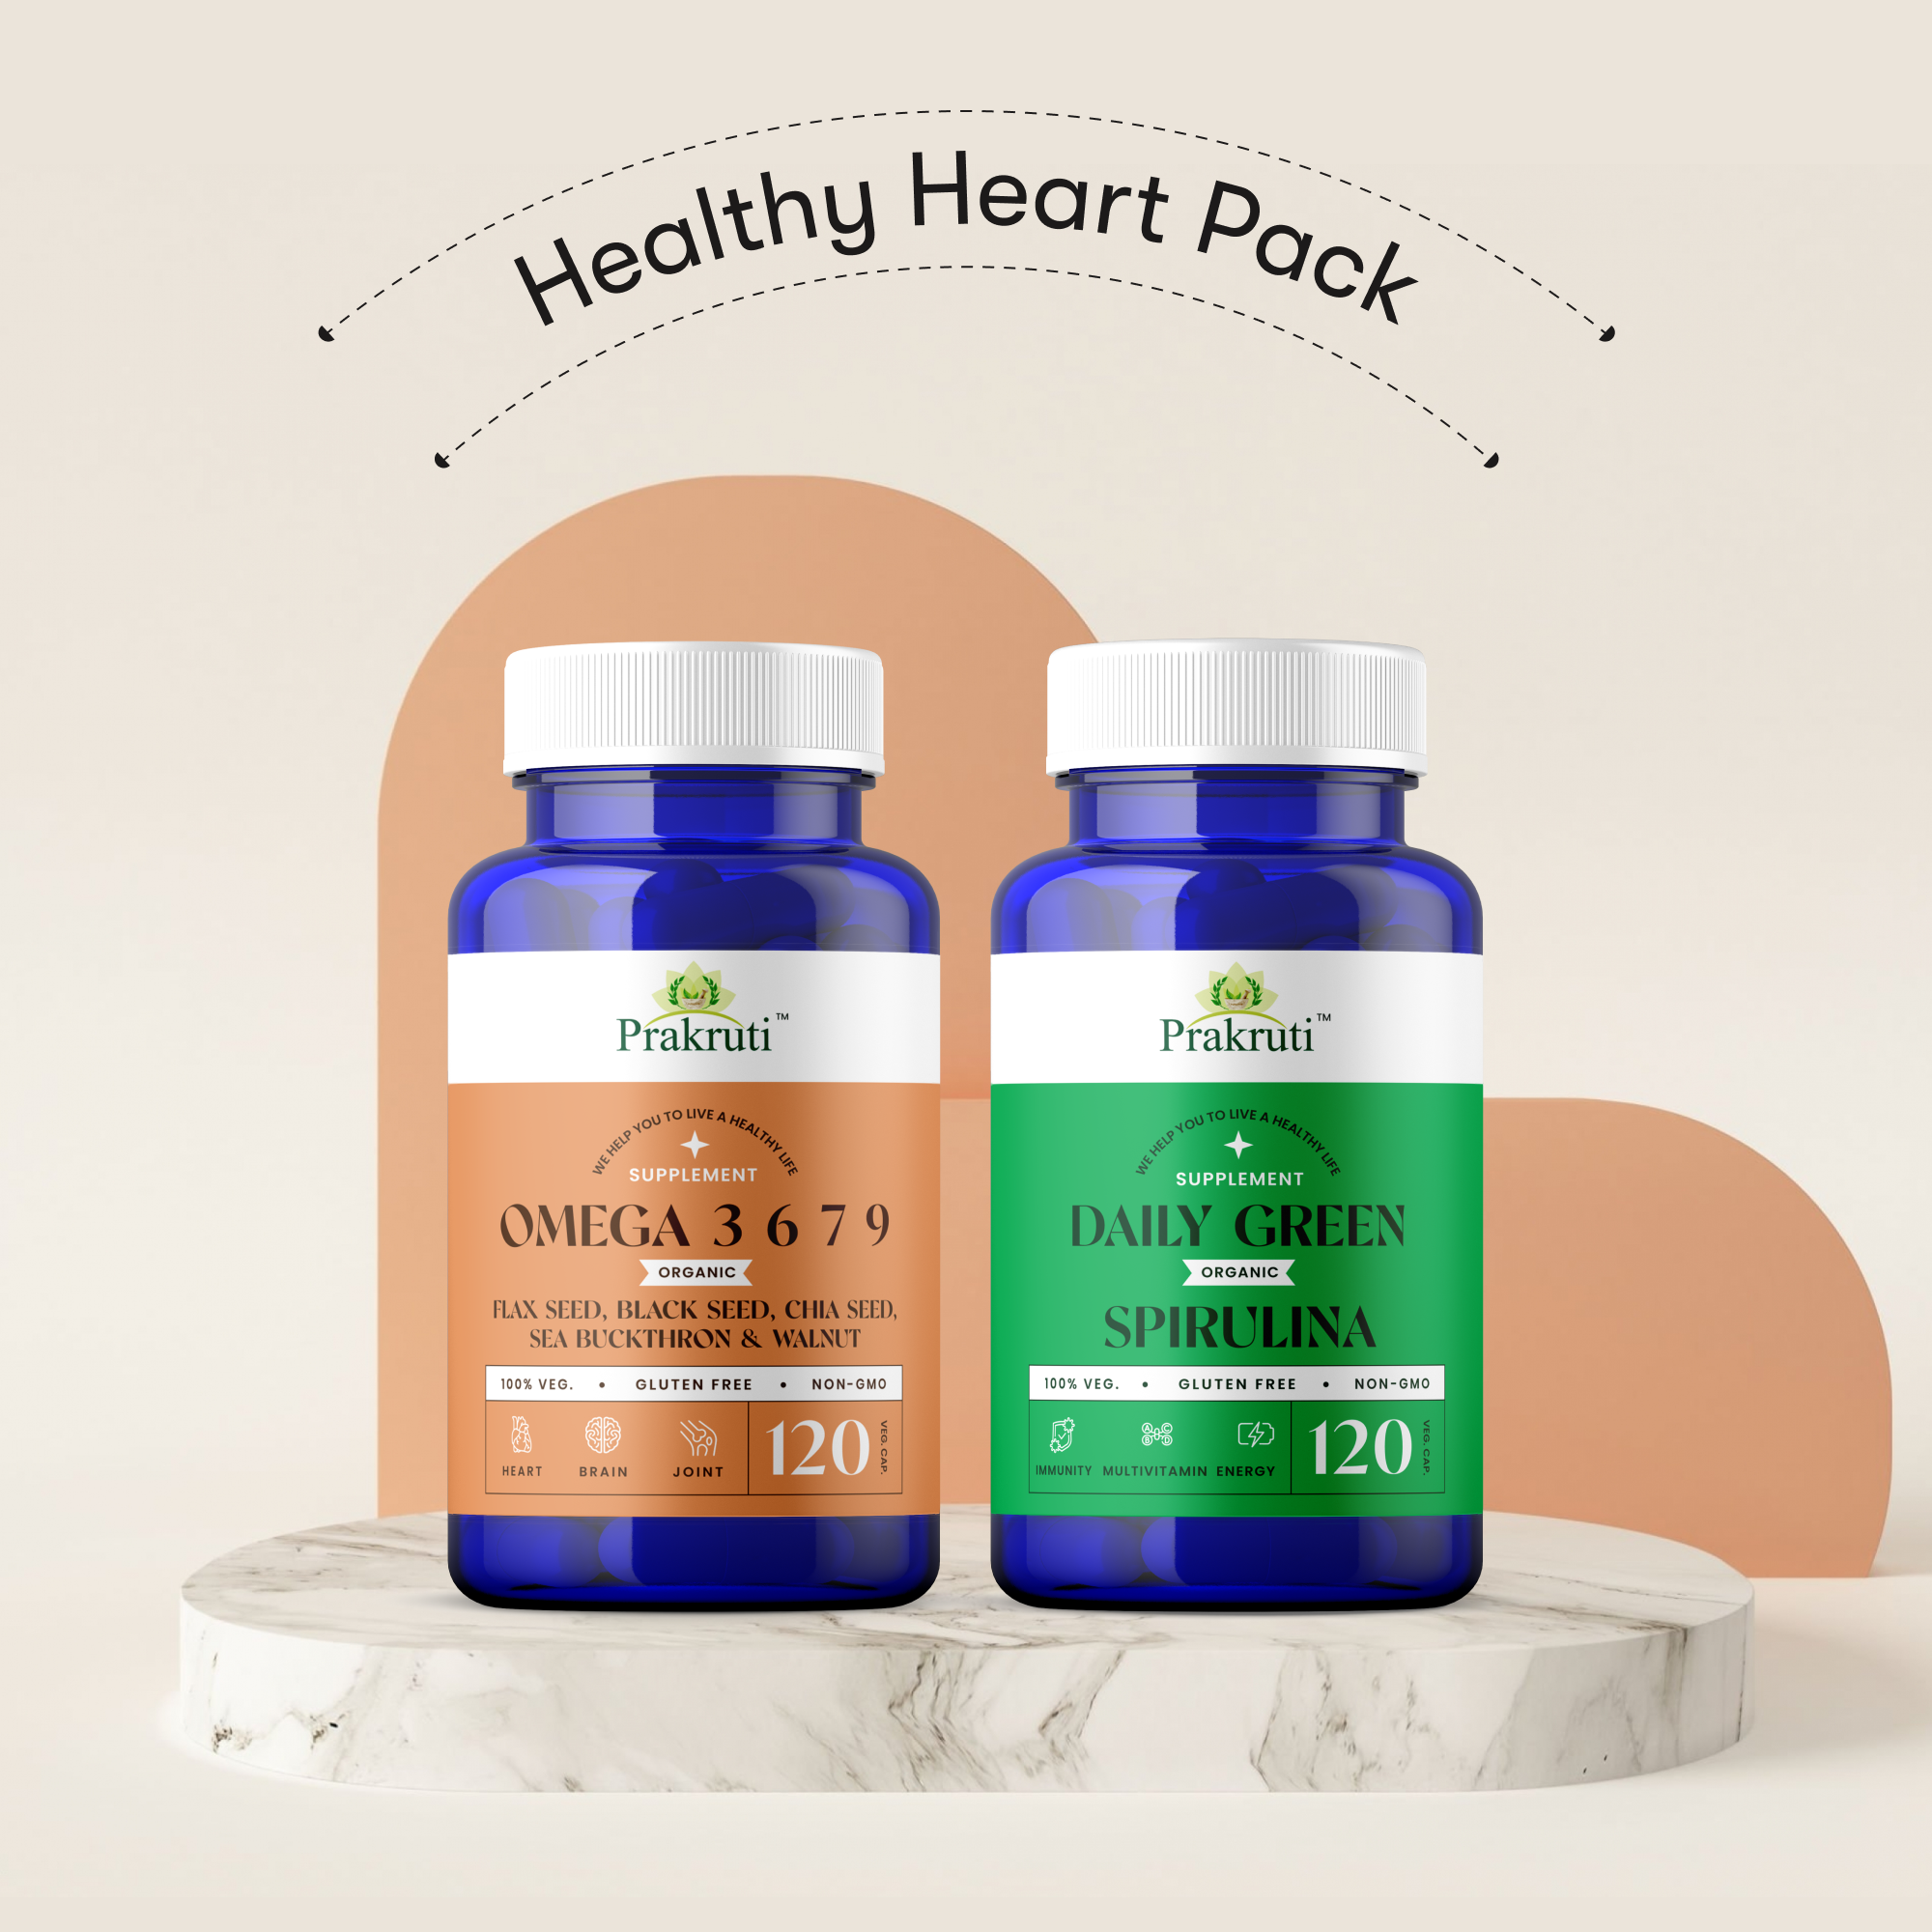 Healthy Heart Pack